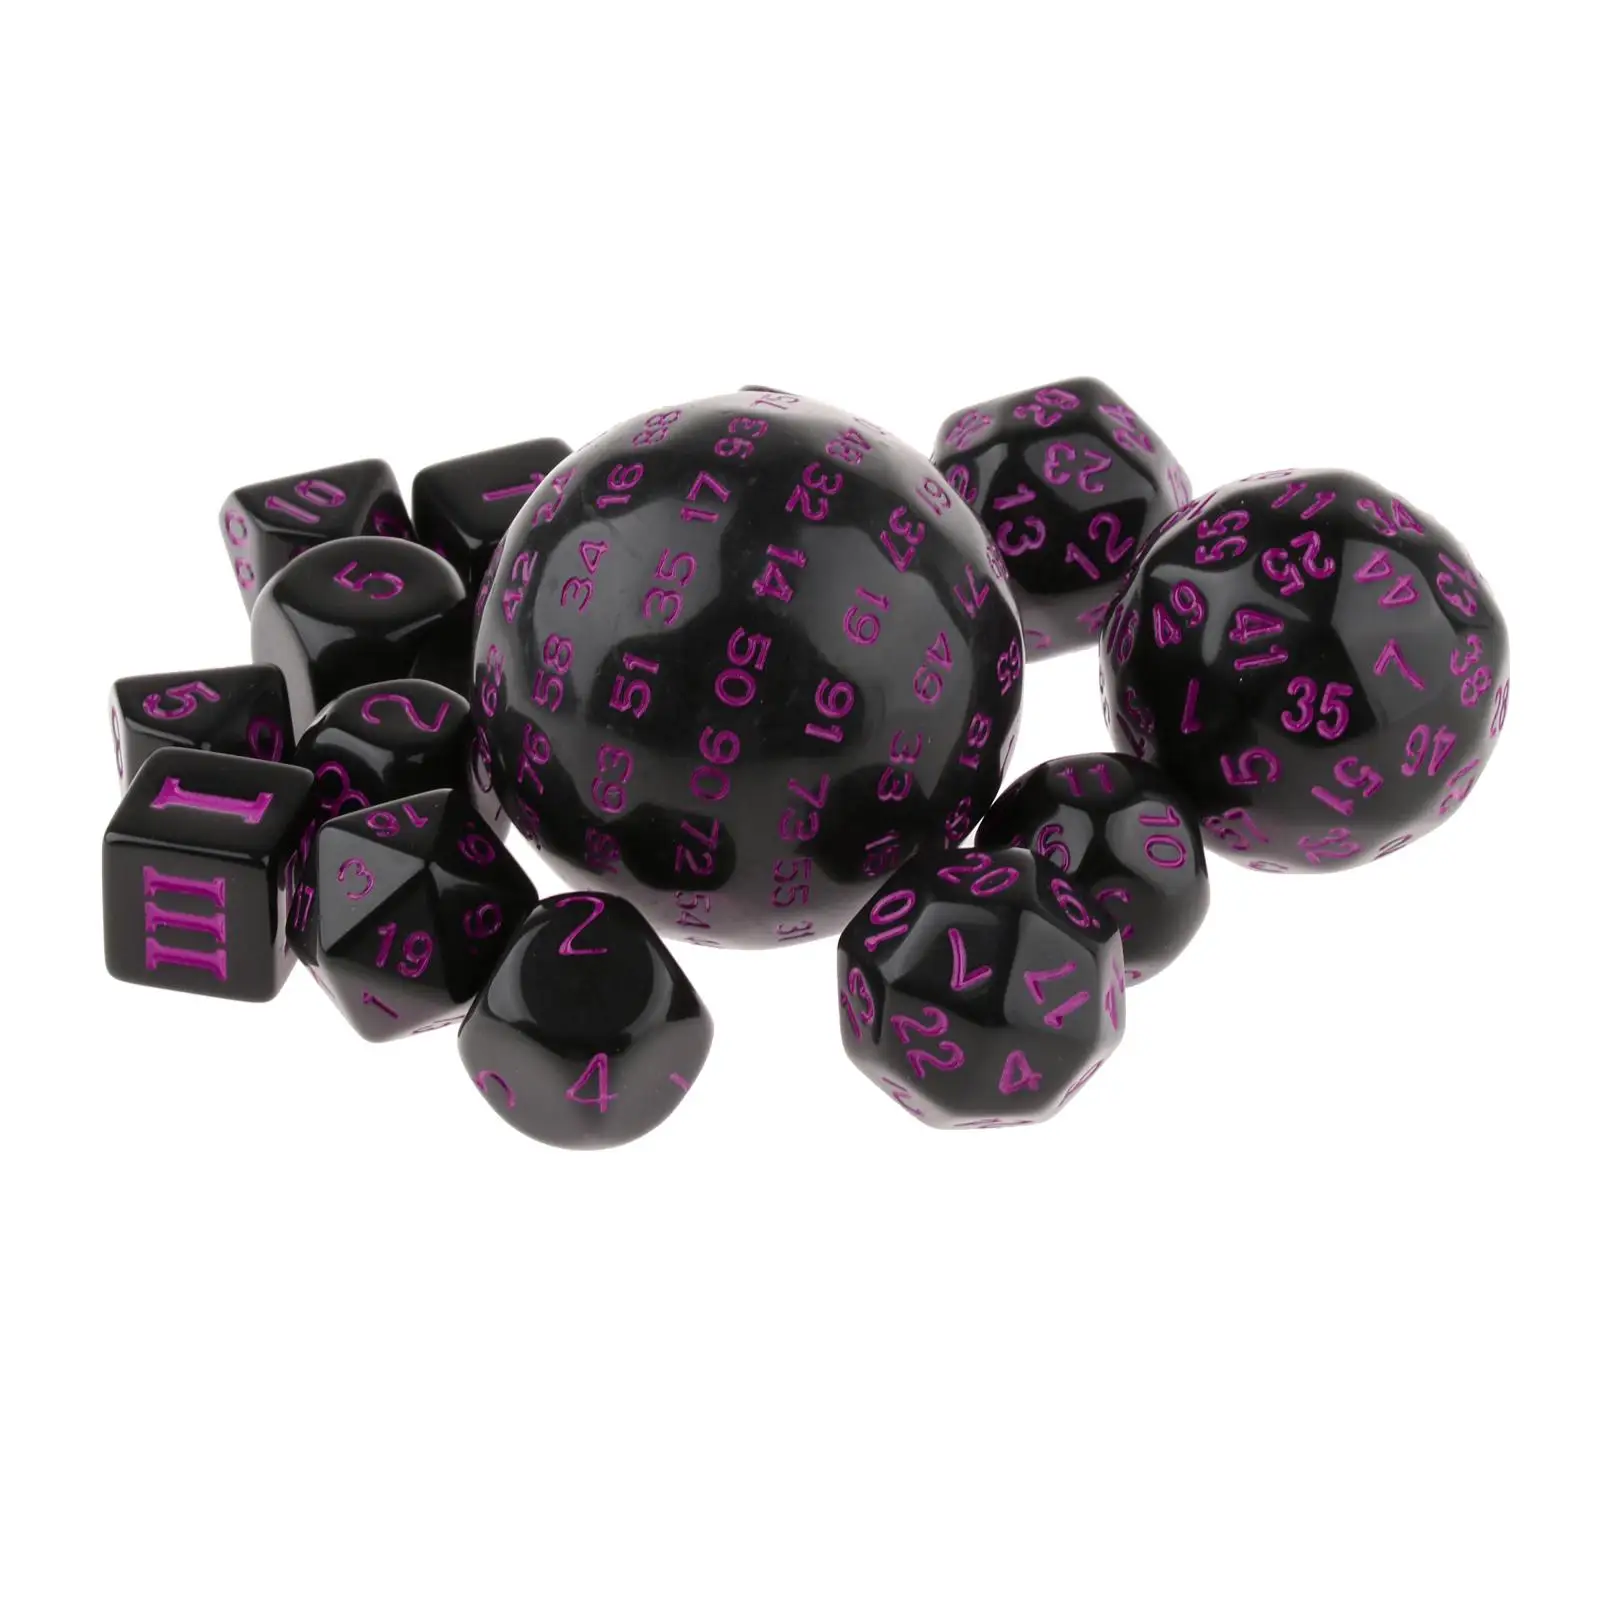 15Pcs Multi-sided Dice for MTG DND RPG Role Play Party Table Game Props